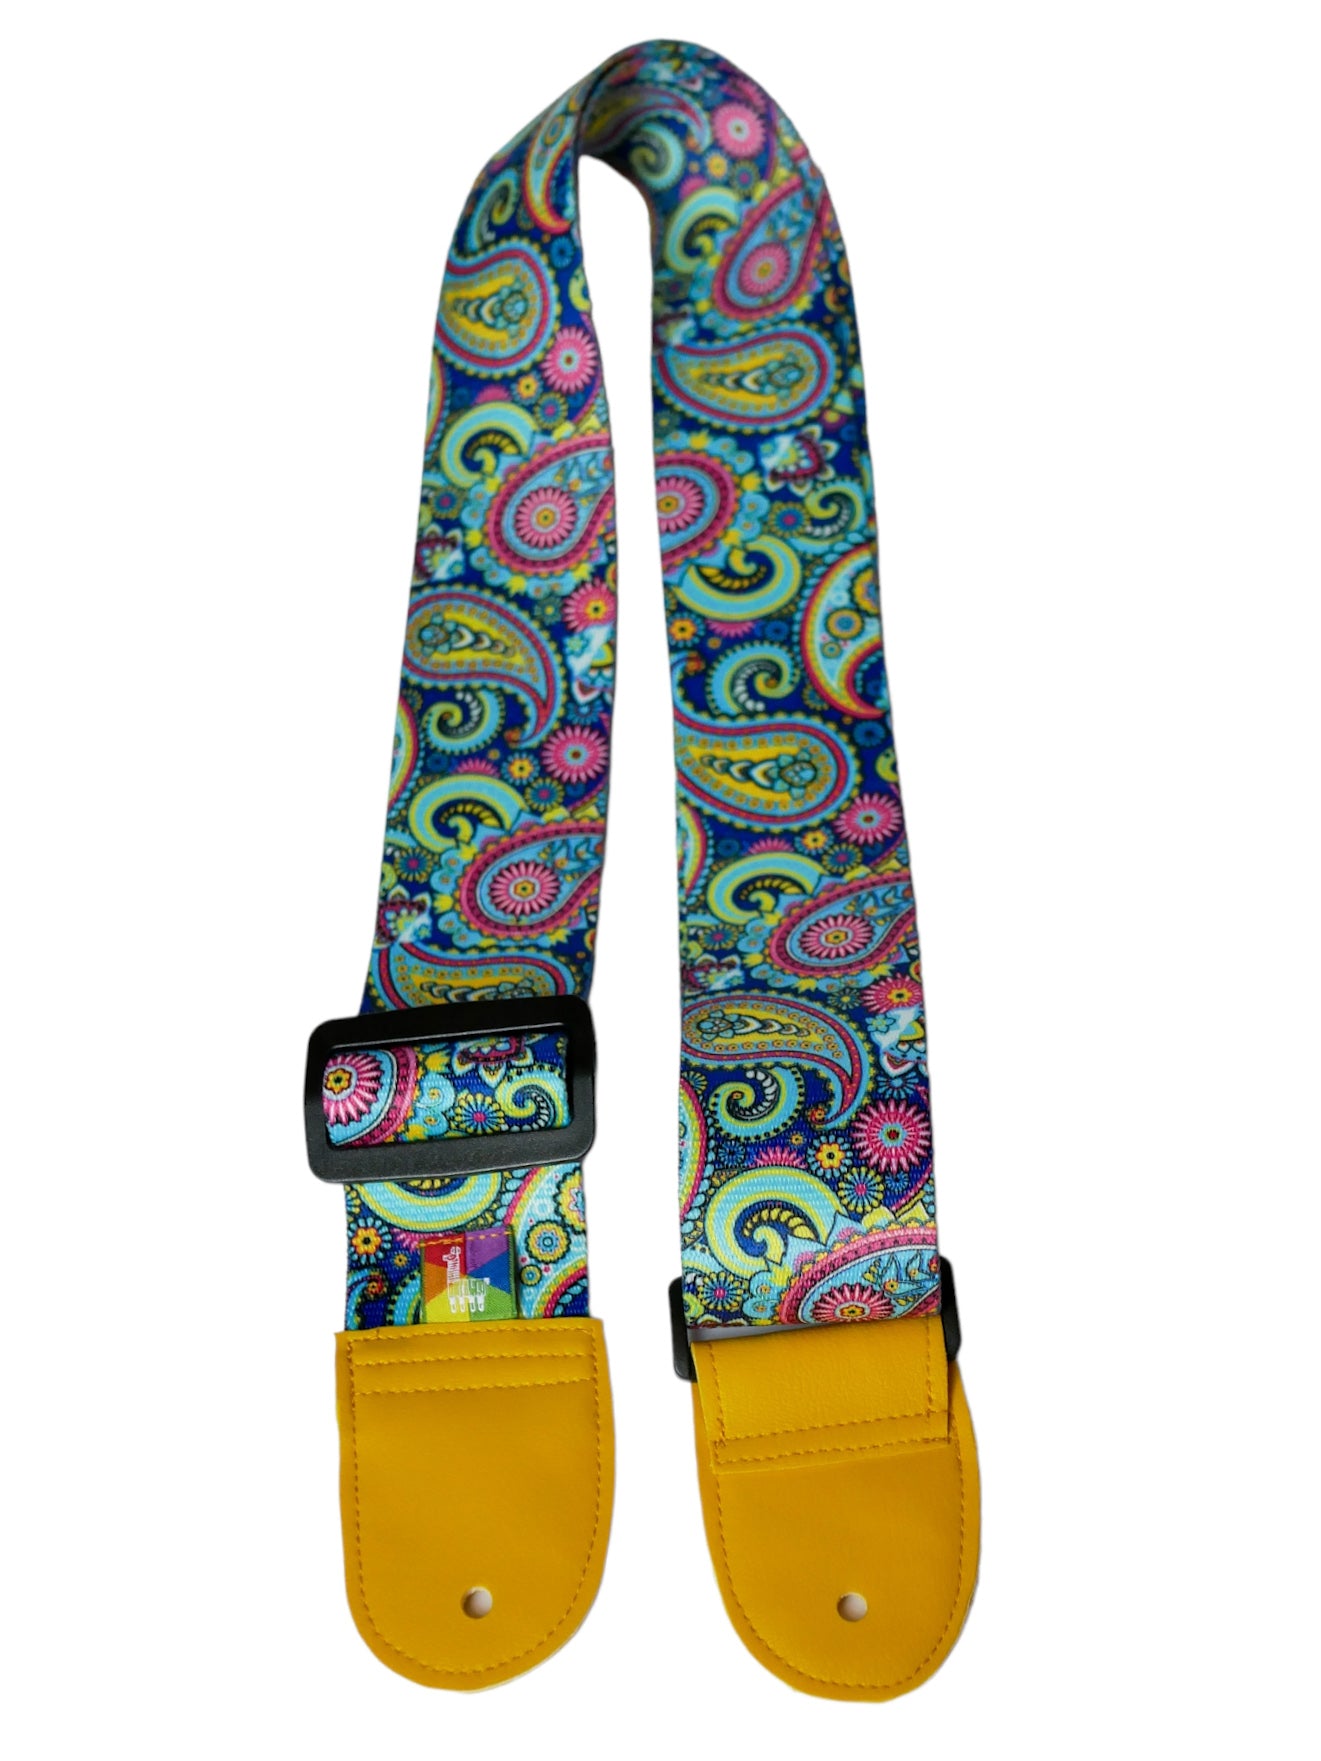 READY TO SHIP Guitar Straps - Free US Shipping